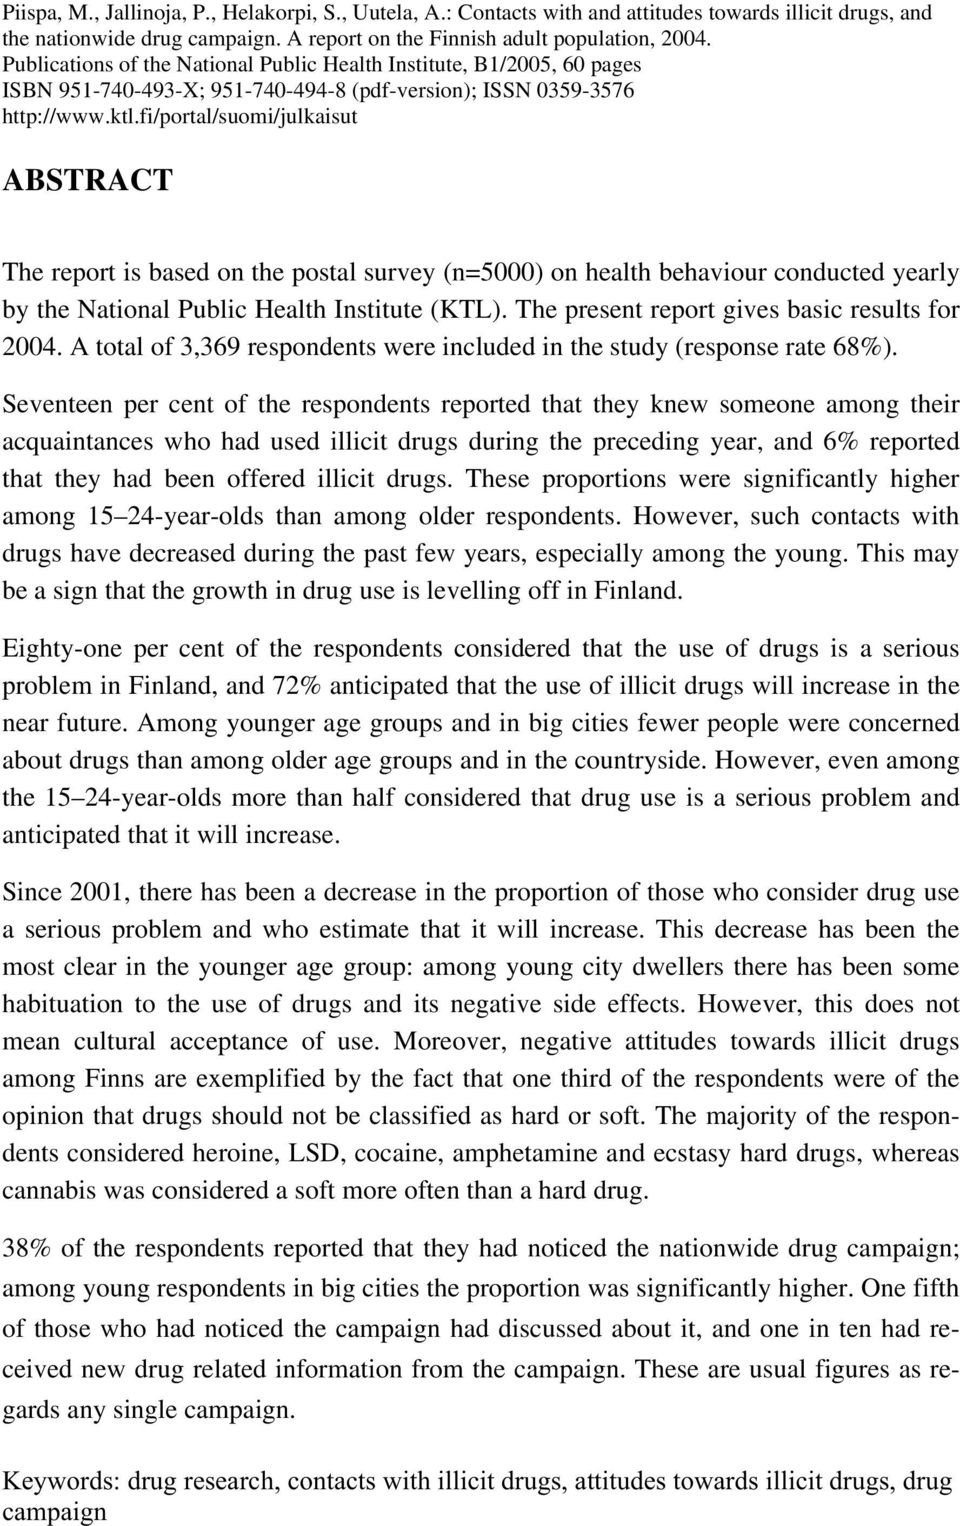 fi/portal/suomi/julkaisut ABSTRACT The report is based on the postal survey (n=5000) on health behaviour conducted yearly by the National Public Health Institute (KTL).